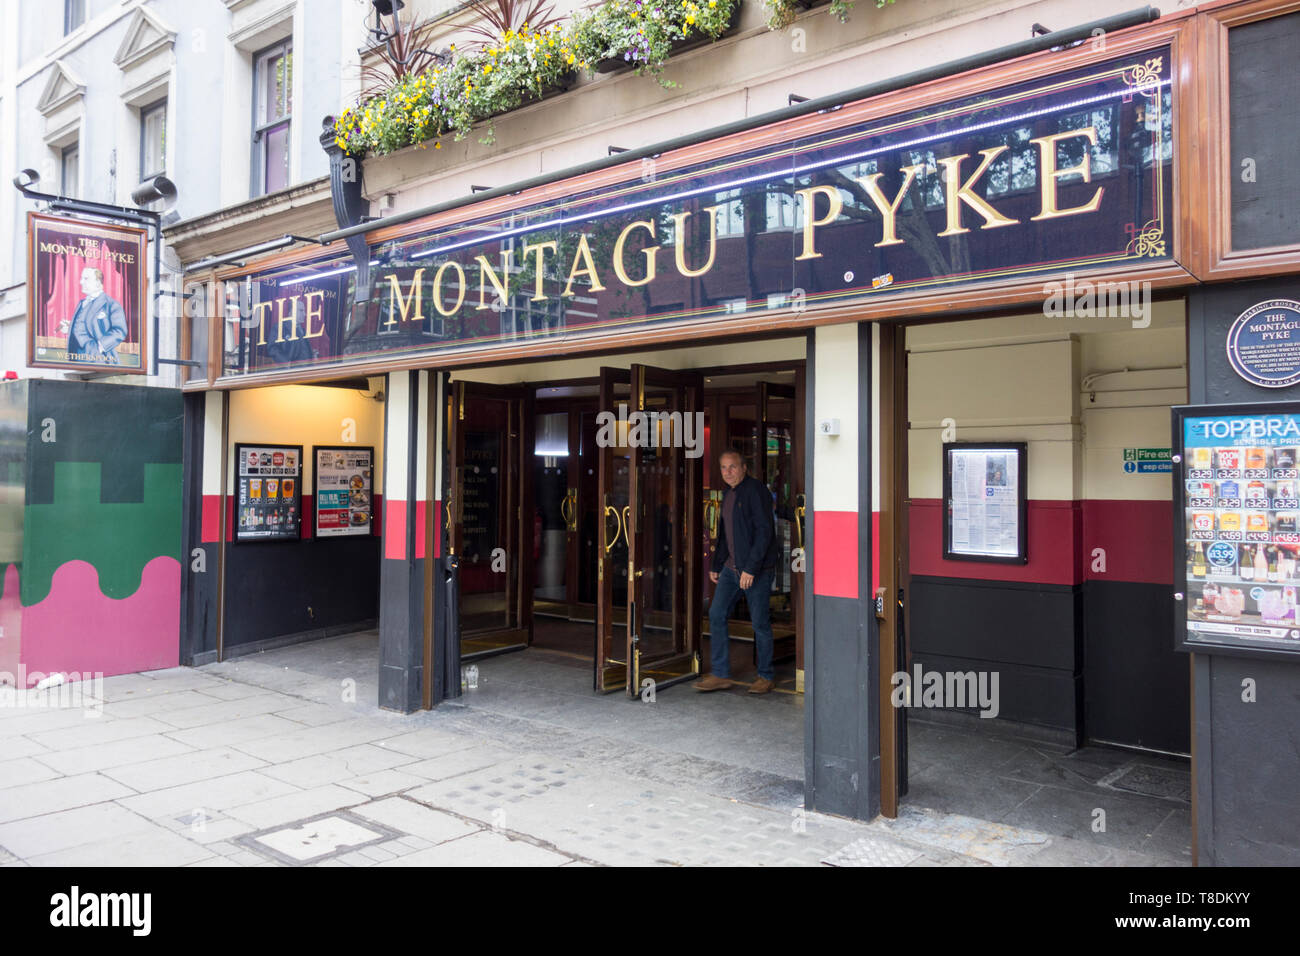 The Montague Pyke public House, a pub belonging to Wetherspoons chain on Charing Cross Road, Soho, London, WC2, UK Stock Photo